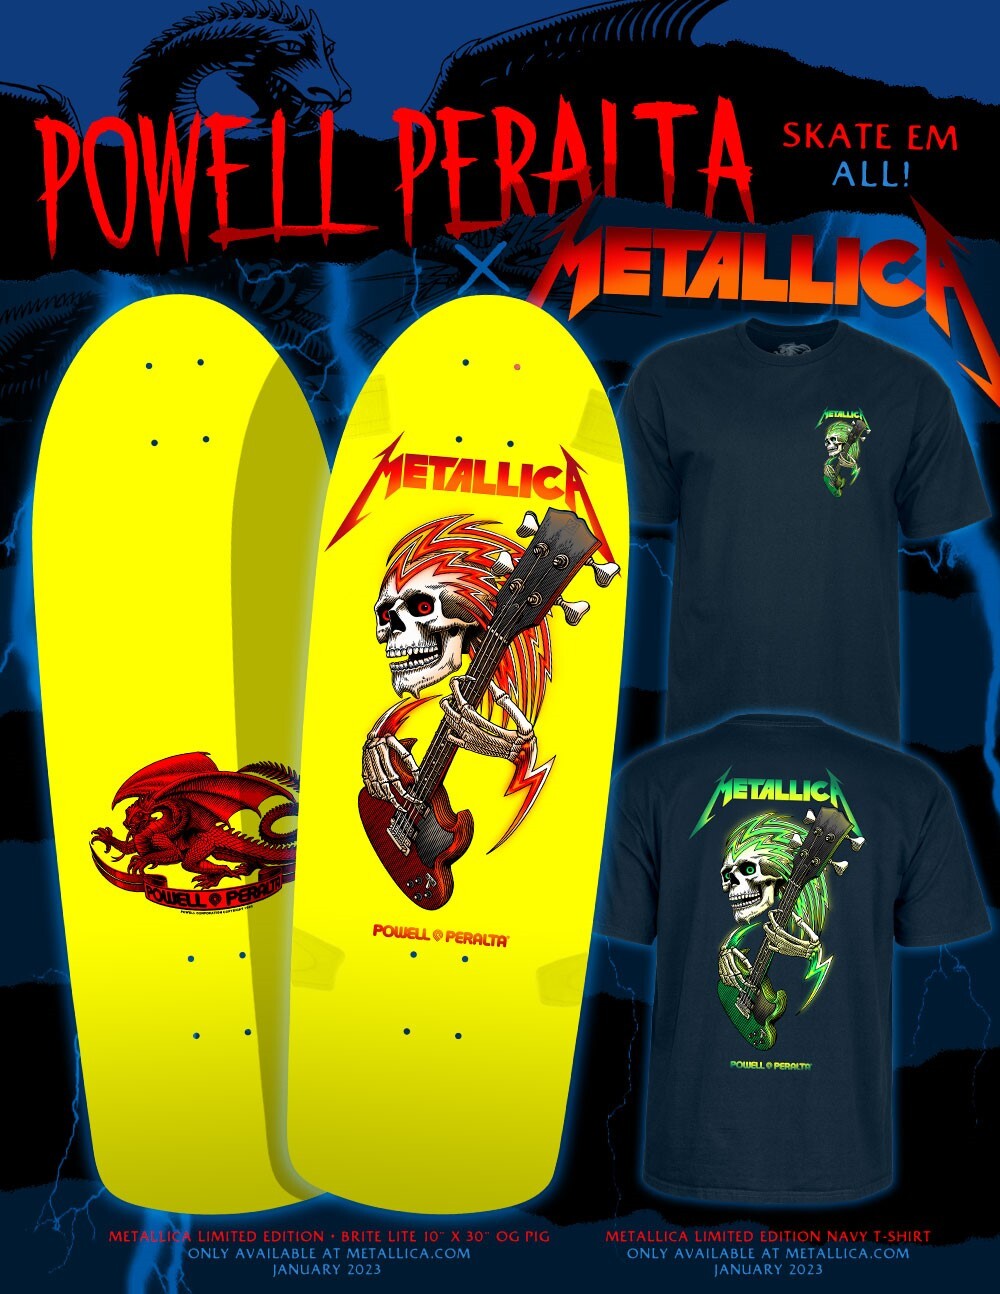 Metallica on X: ""The skate deck that you feel most comfortable with, is your instrument..." – @RobertTrujillo Our newest with @PowellPeralta has landed in Met Store! Get the skate deck